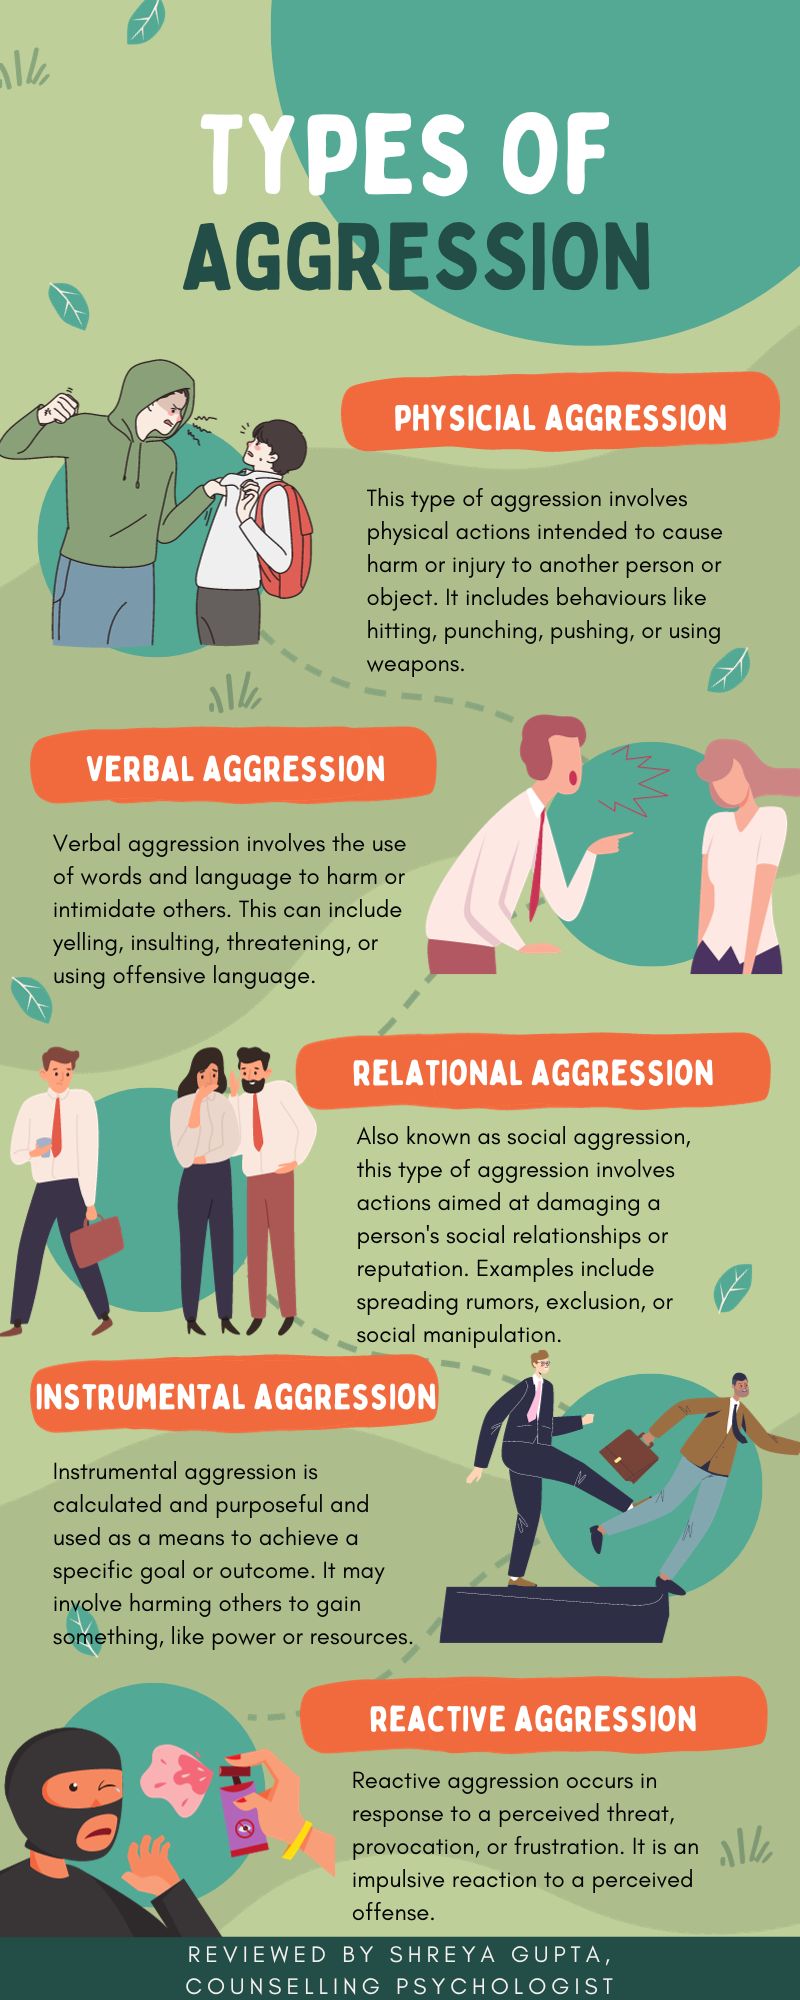 5 types of aggression